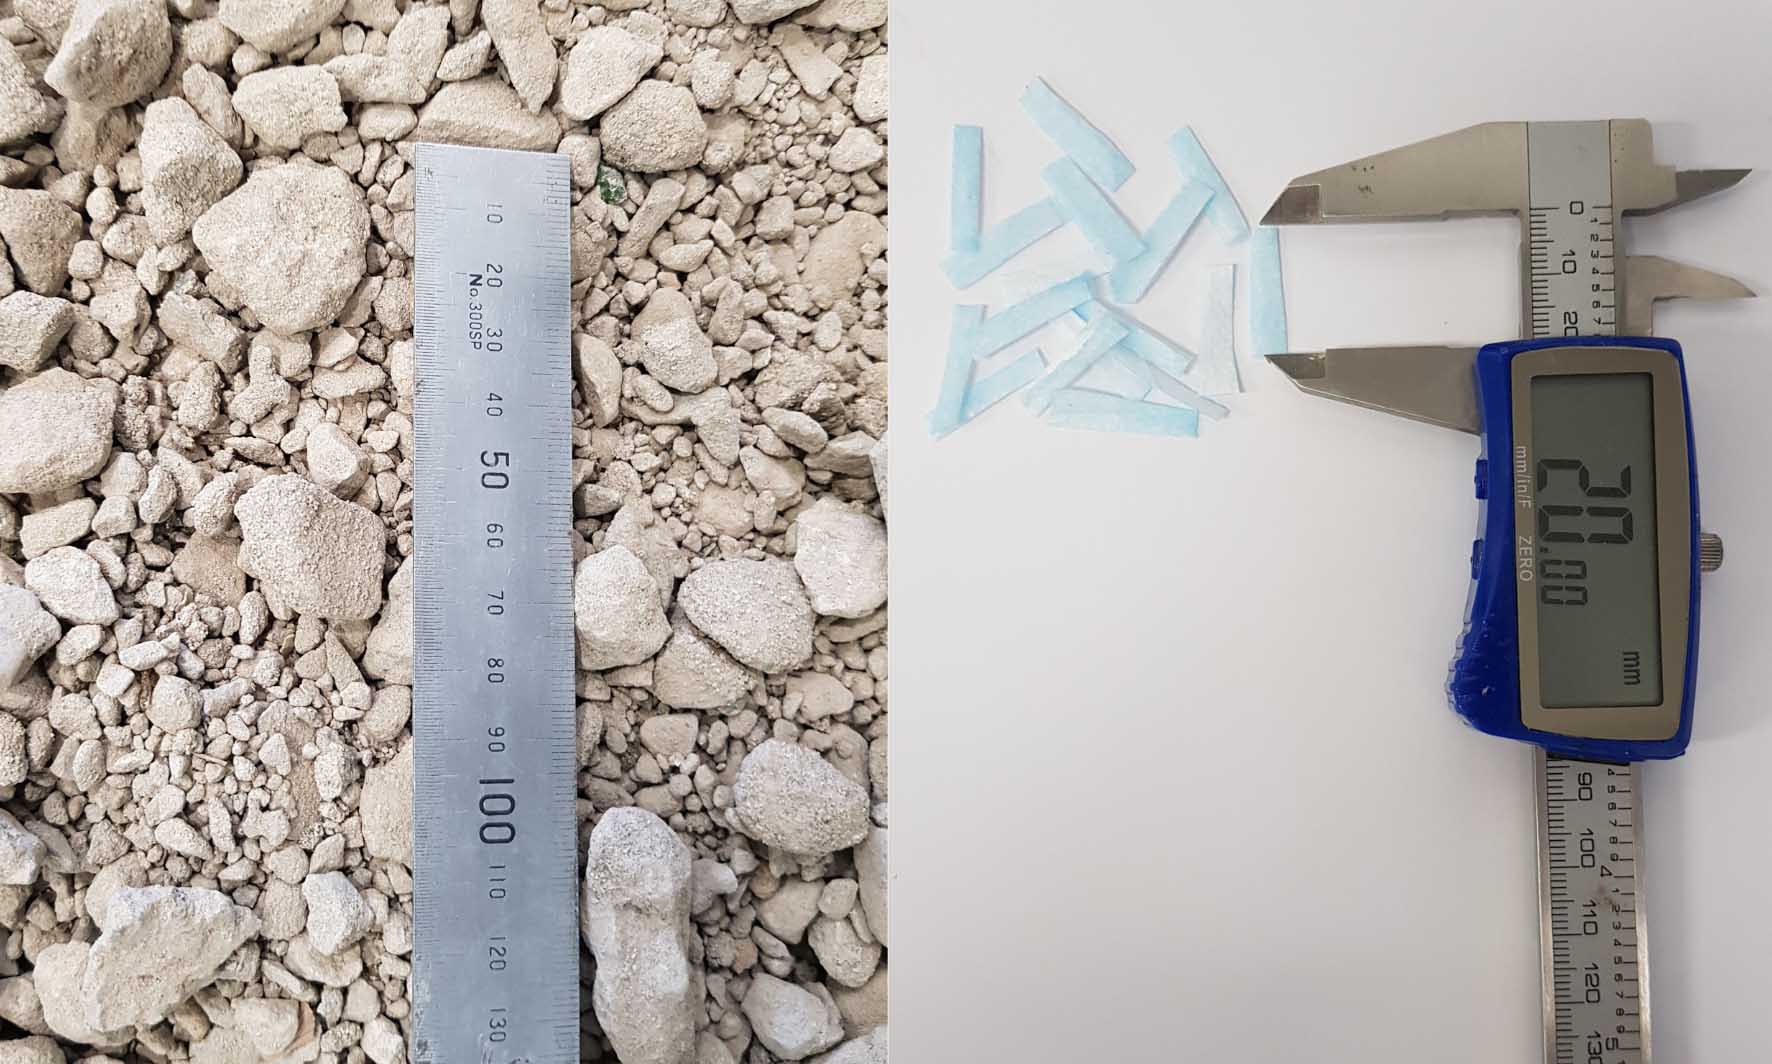 Recycled concrete aggregate (left) and small strips of shredded disposable face masks (right)